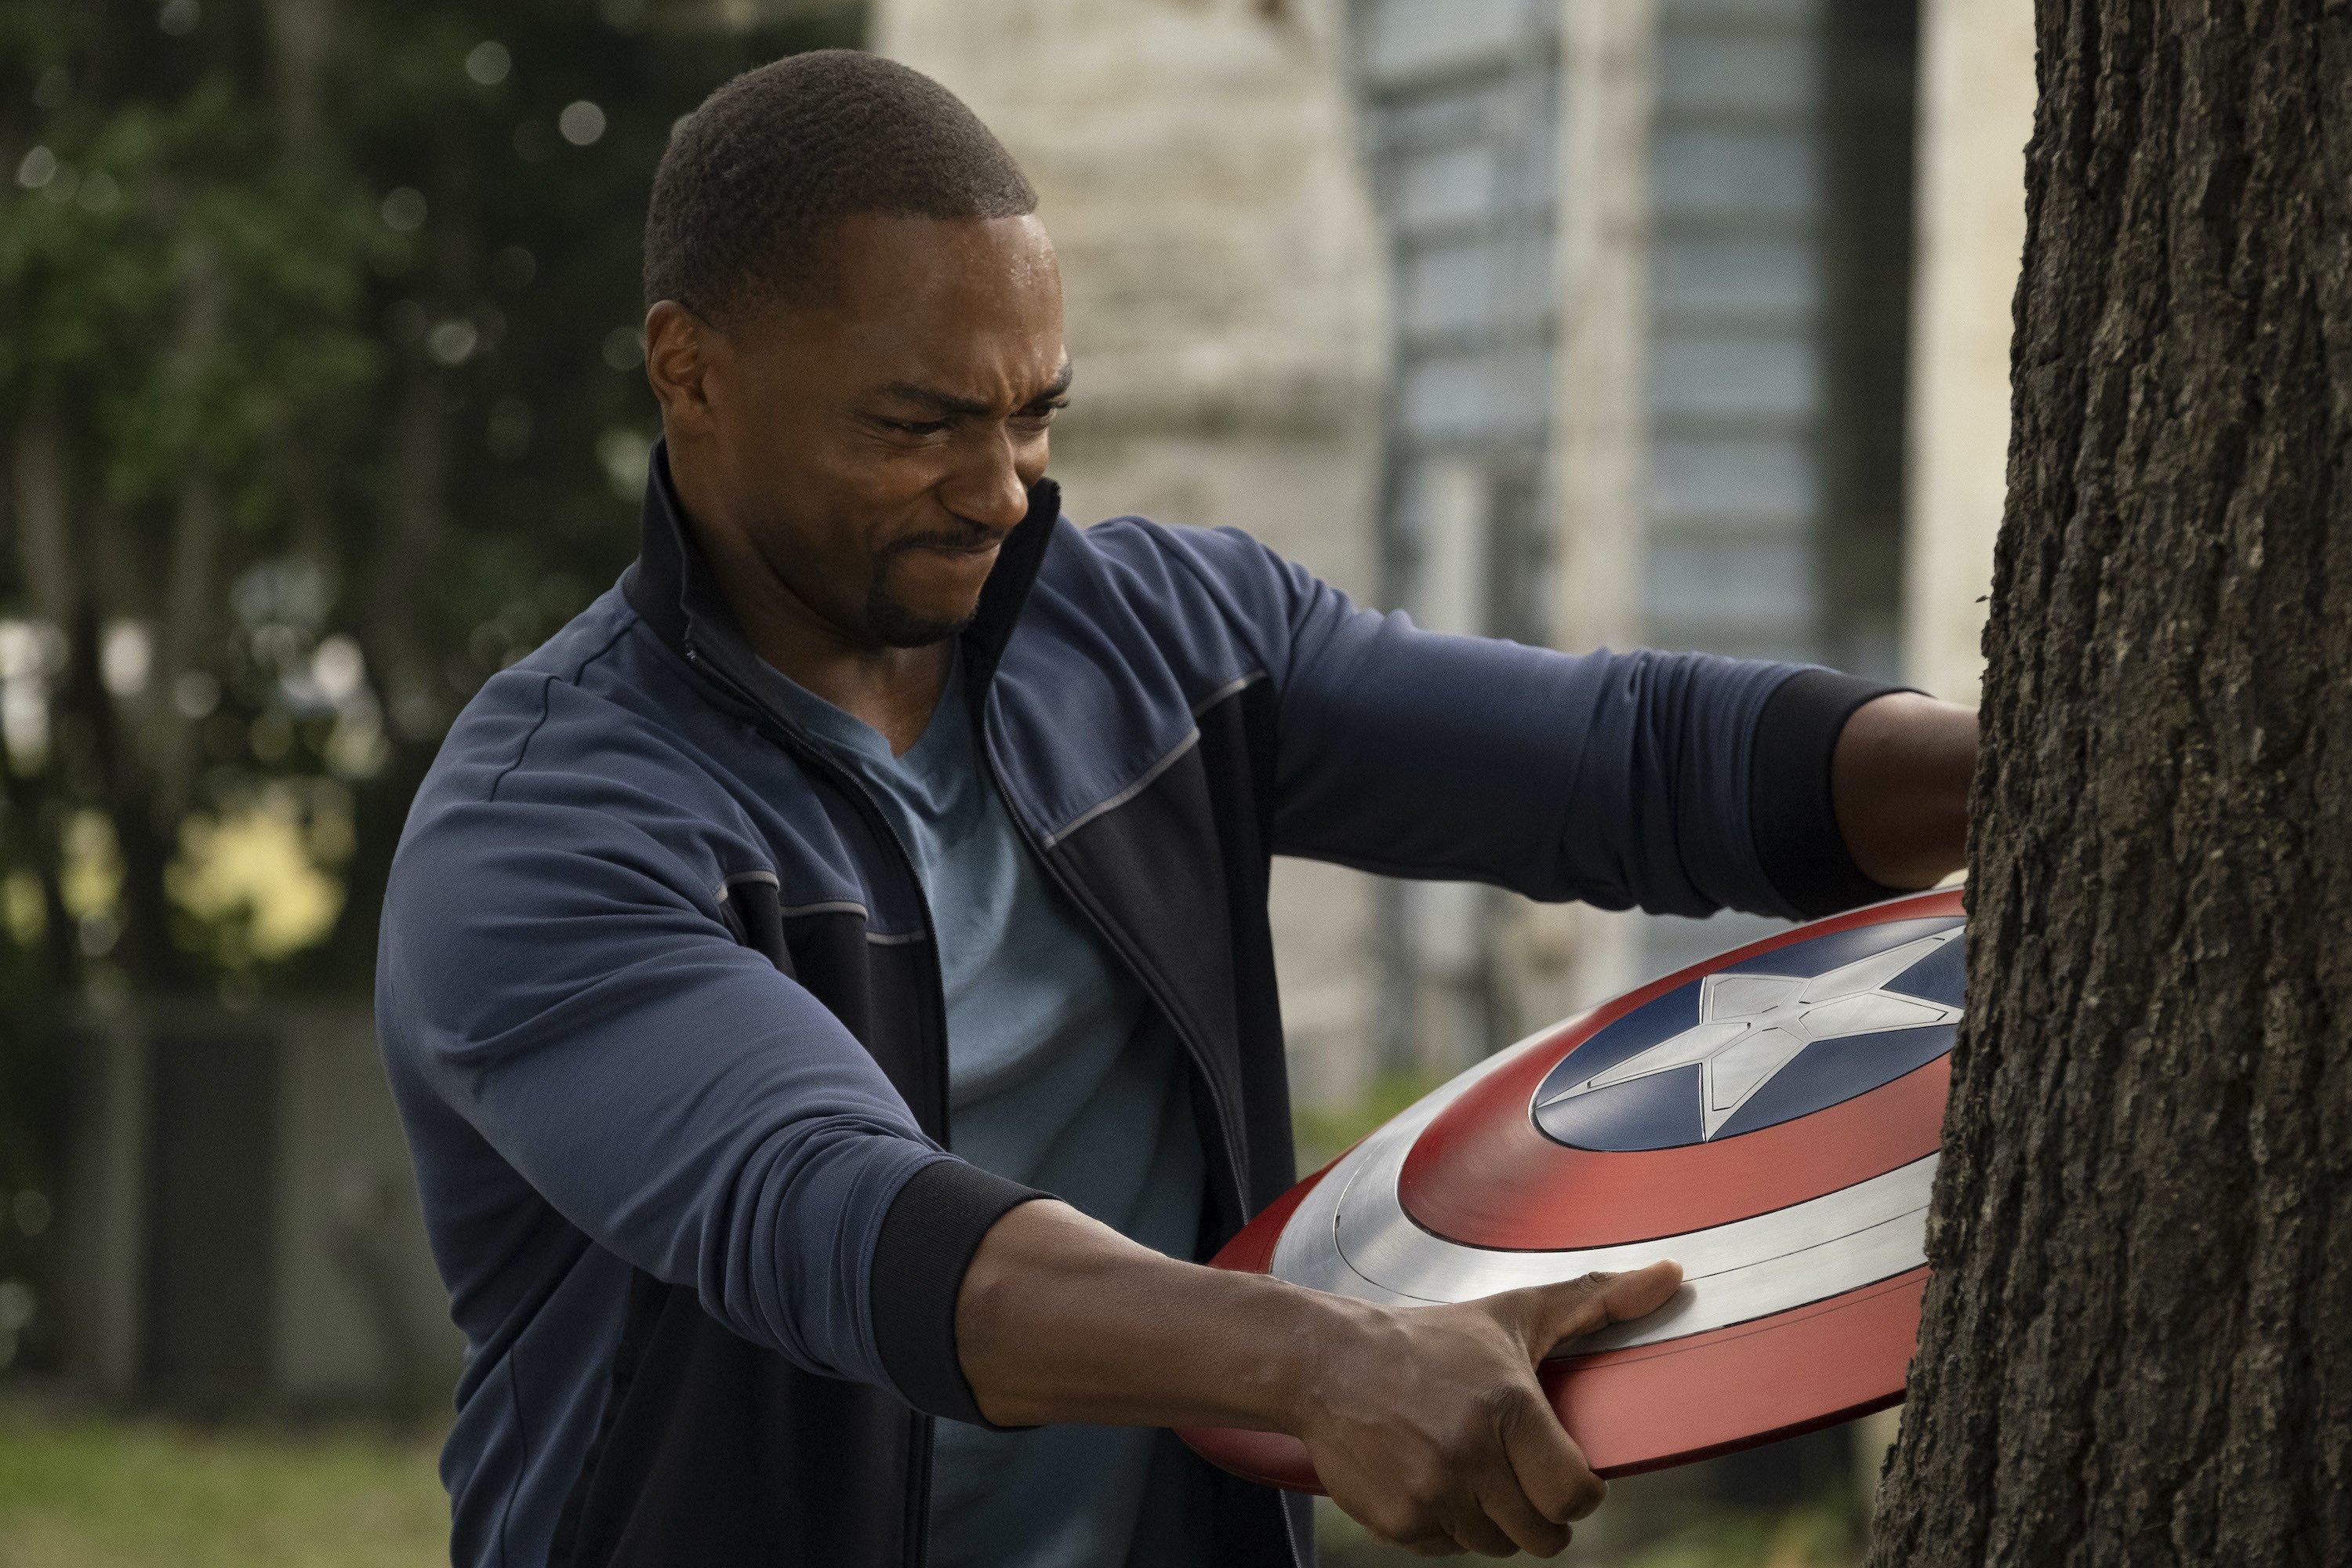 Anthony Mackie as Sam Wilson aka Captain America in The Falcon and The Winter Soldier  Image Source: Chuck Zlotnick/Disney